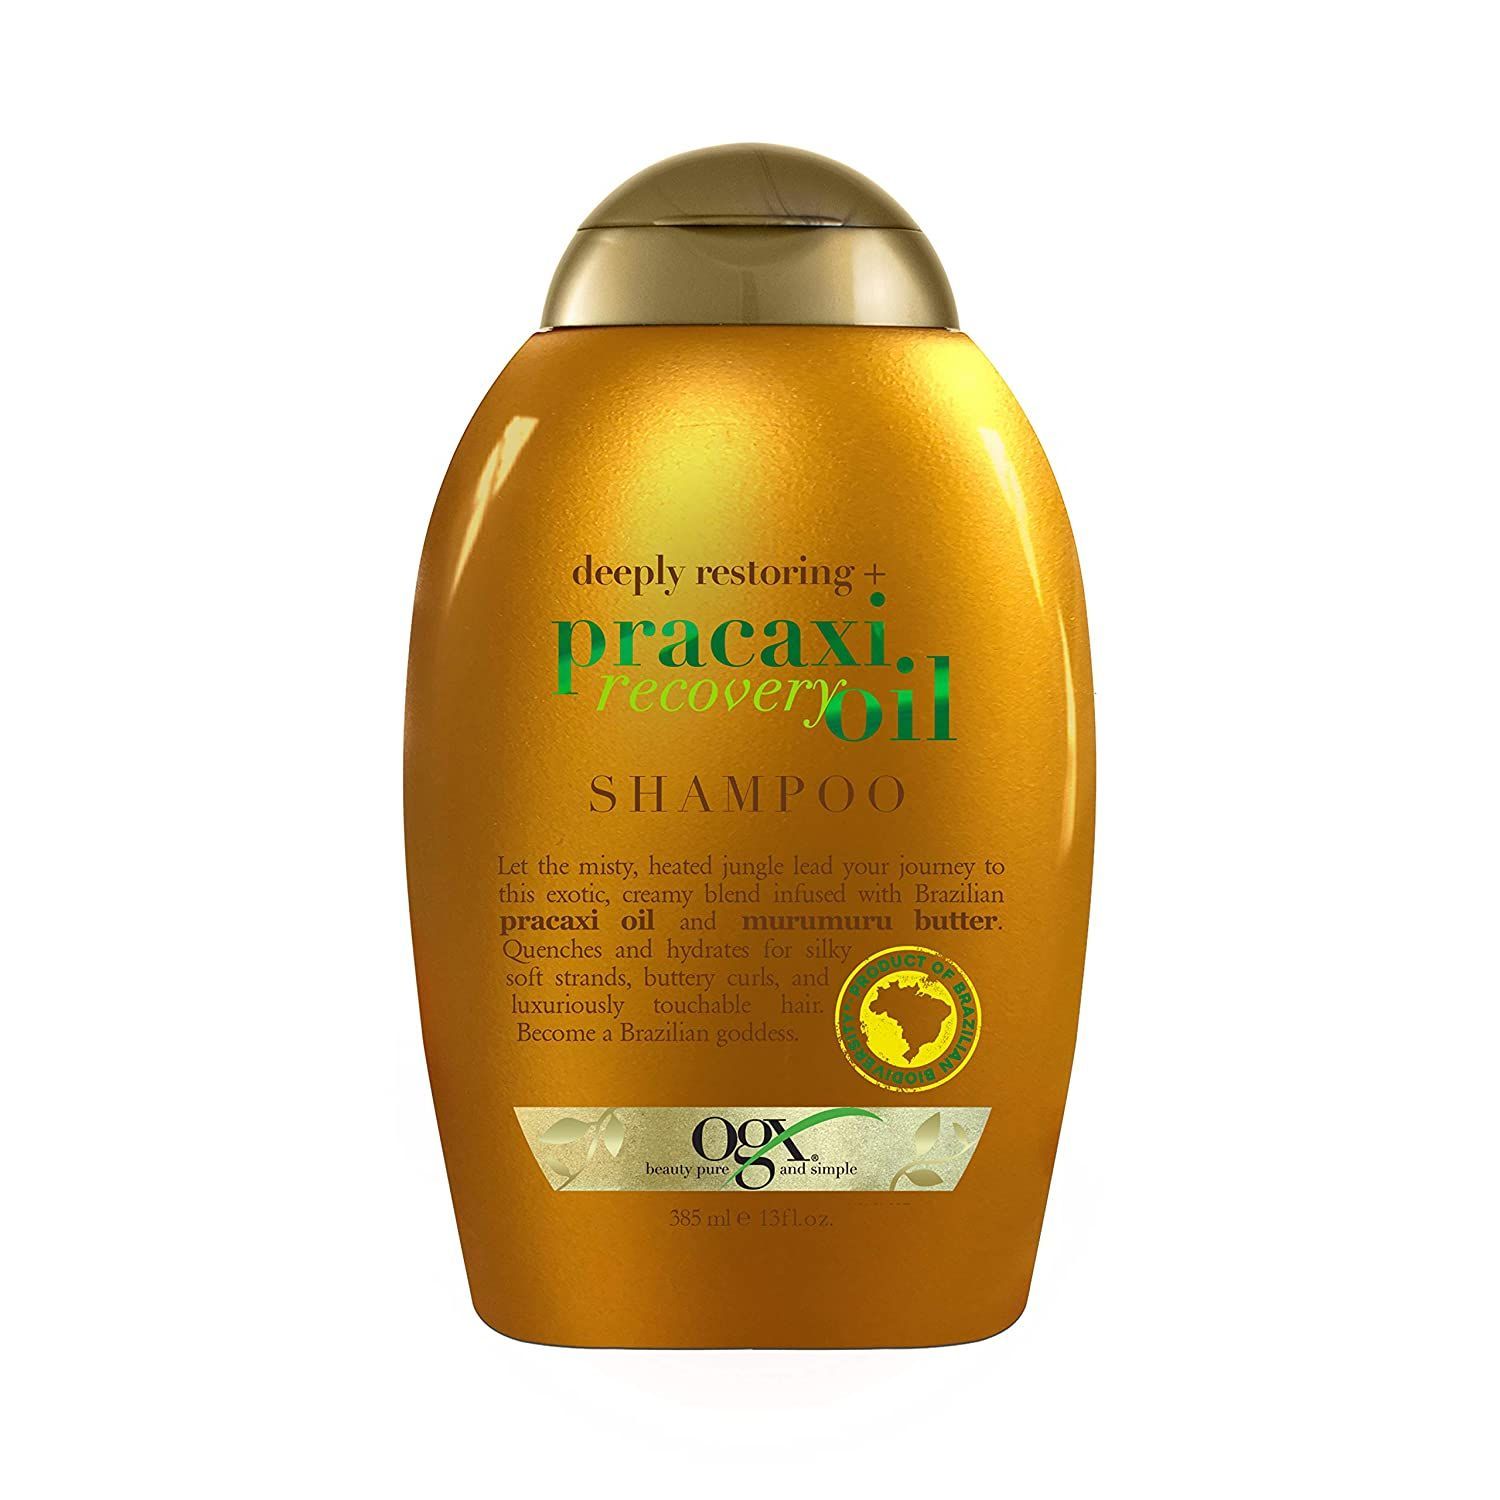 Anomaly Hydrating Shampoo for Dull  Dry Hair with Coconut Oil  Aloe Vera  Buy Anomaly Hydrating Shampoo for Dull  Dry Hair with Coconut Oil  Aloe  Vera Online at Best